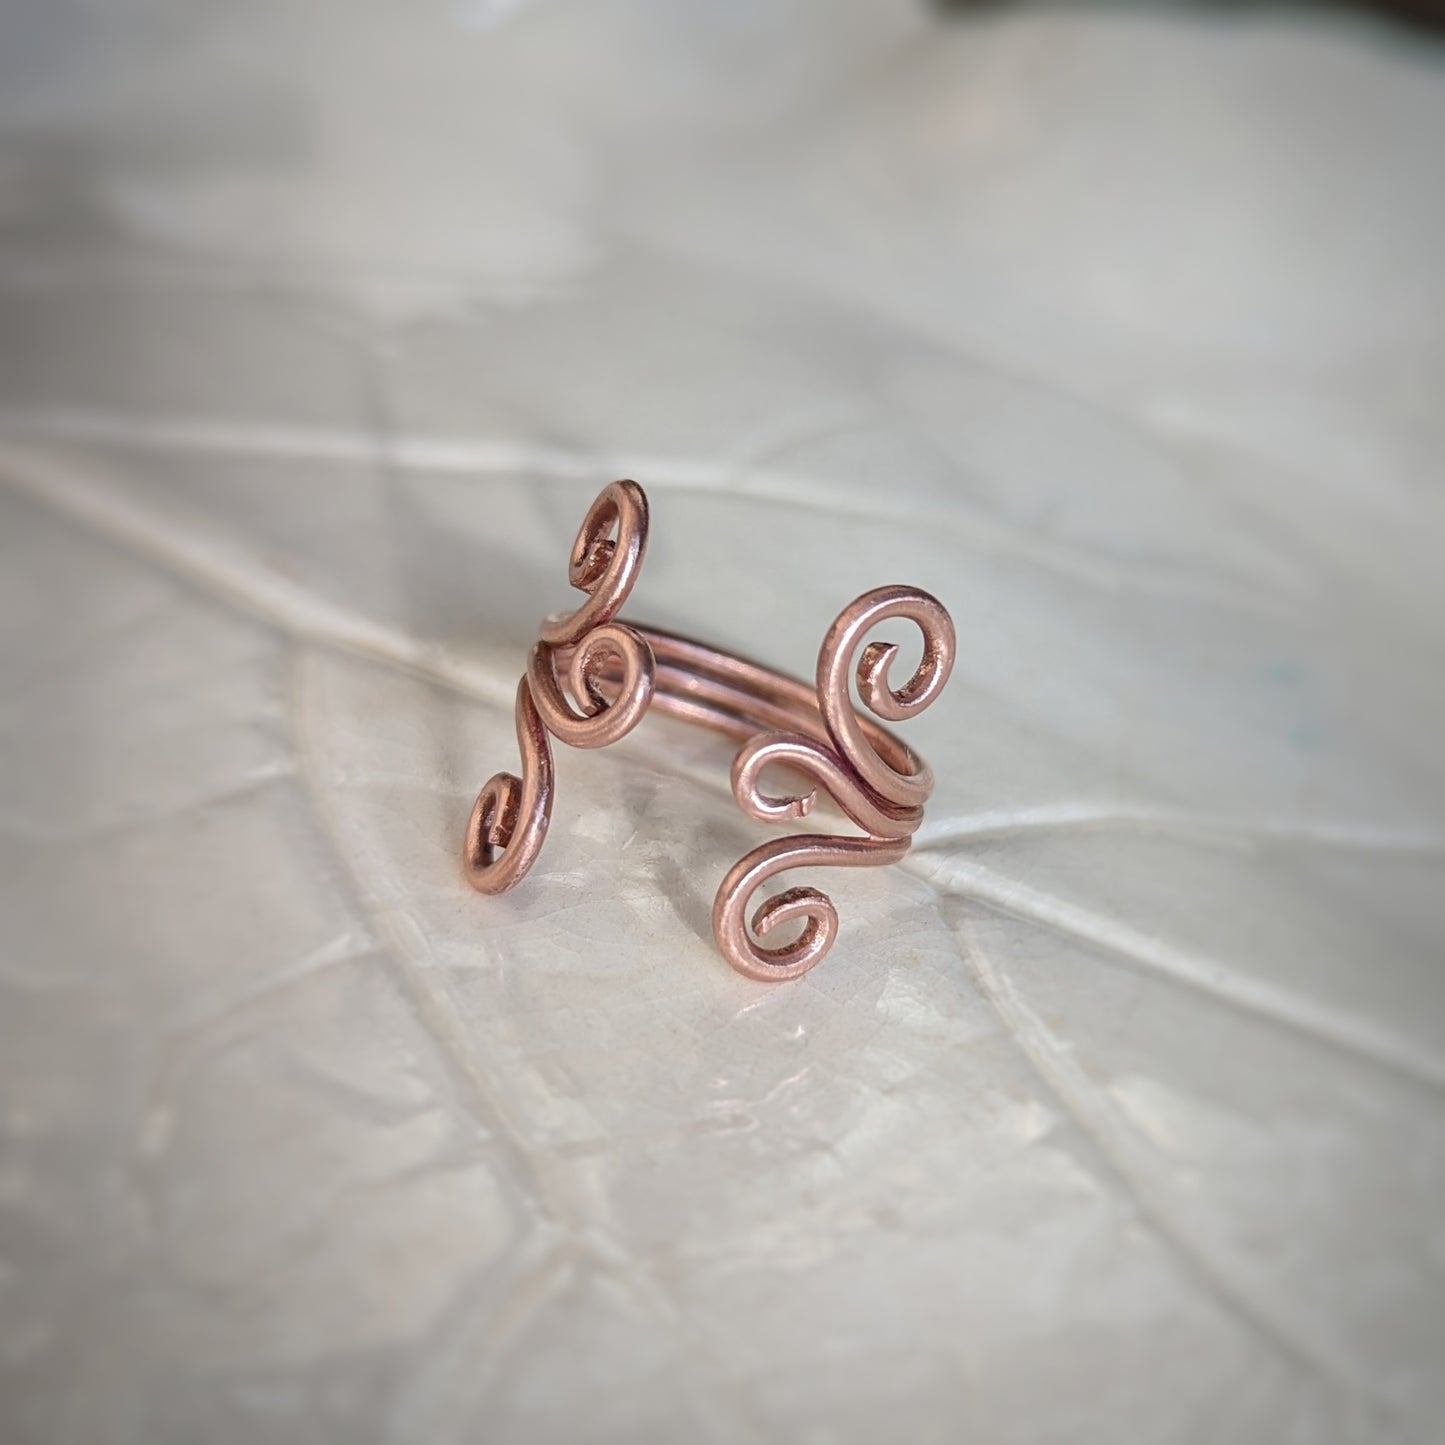 An adjustable copper ring consisting of three wires soldered together, each side ending in graceful swirls shines bright in the daylight.